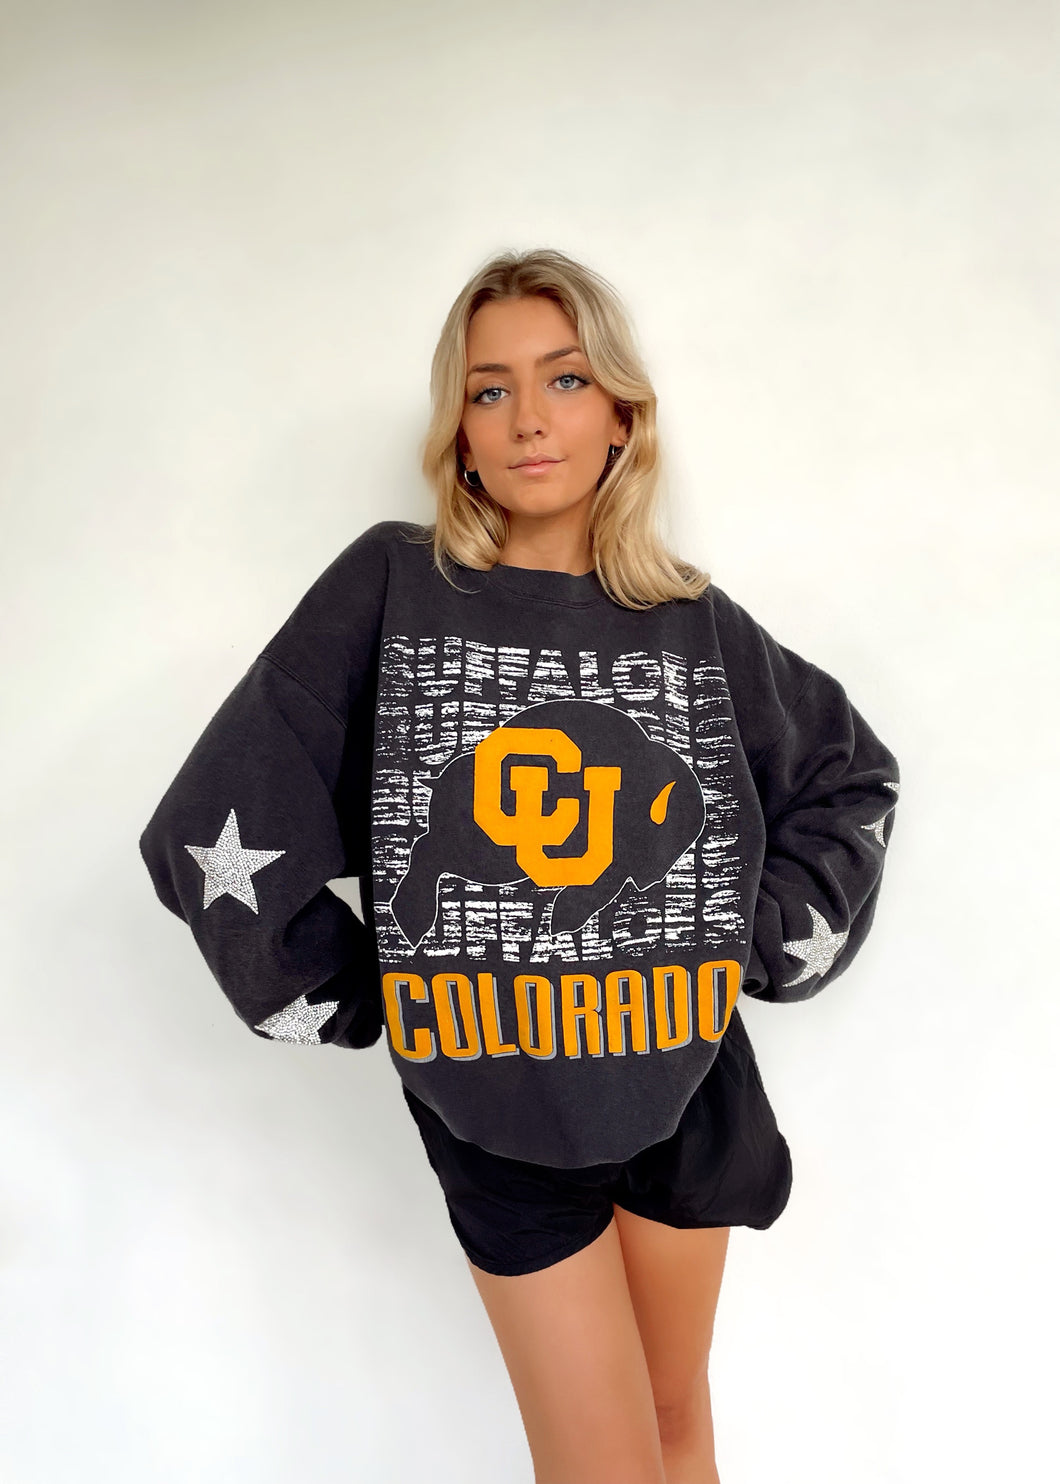 University of Colorado, One of a KIND Vintage Sweatshirt with Crystal Star Design